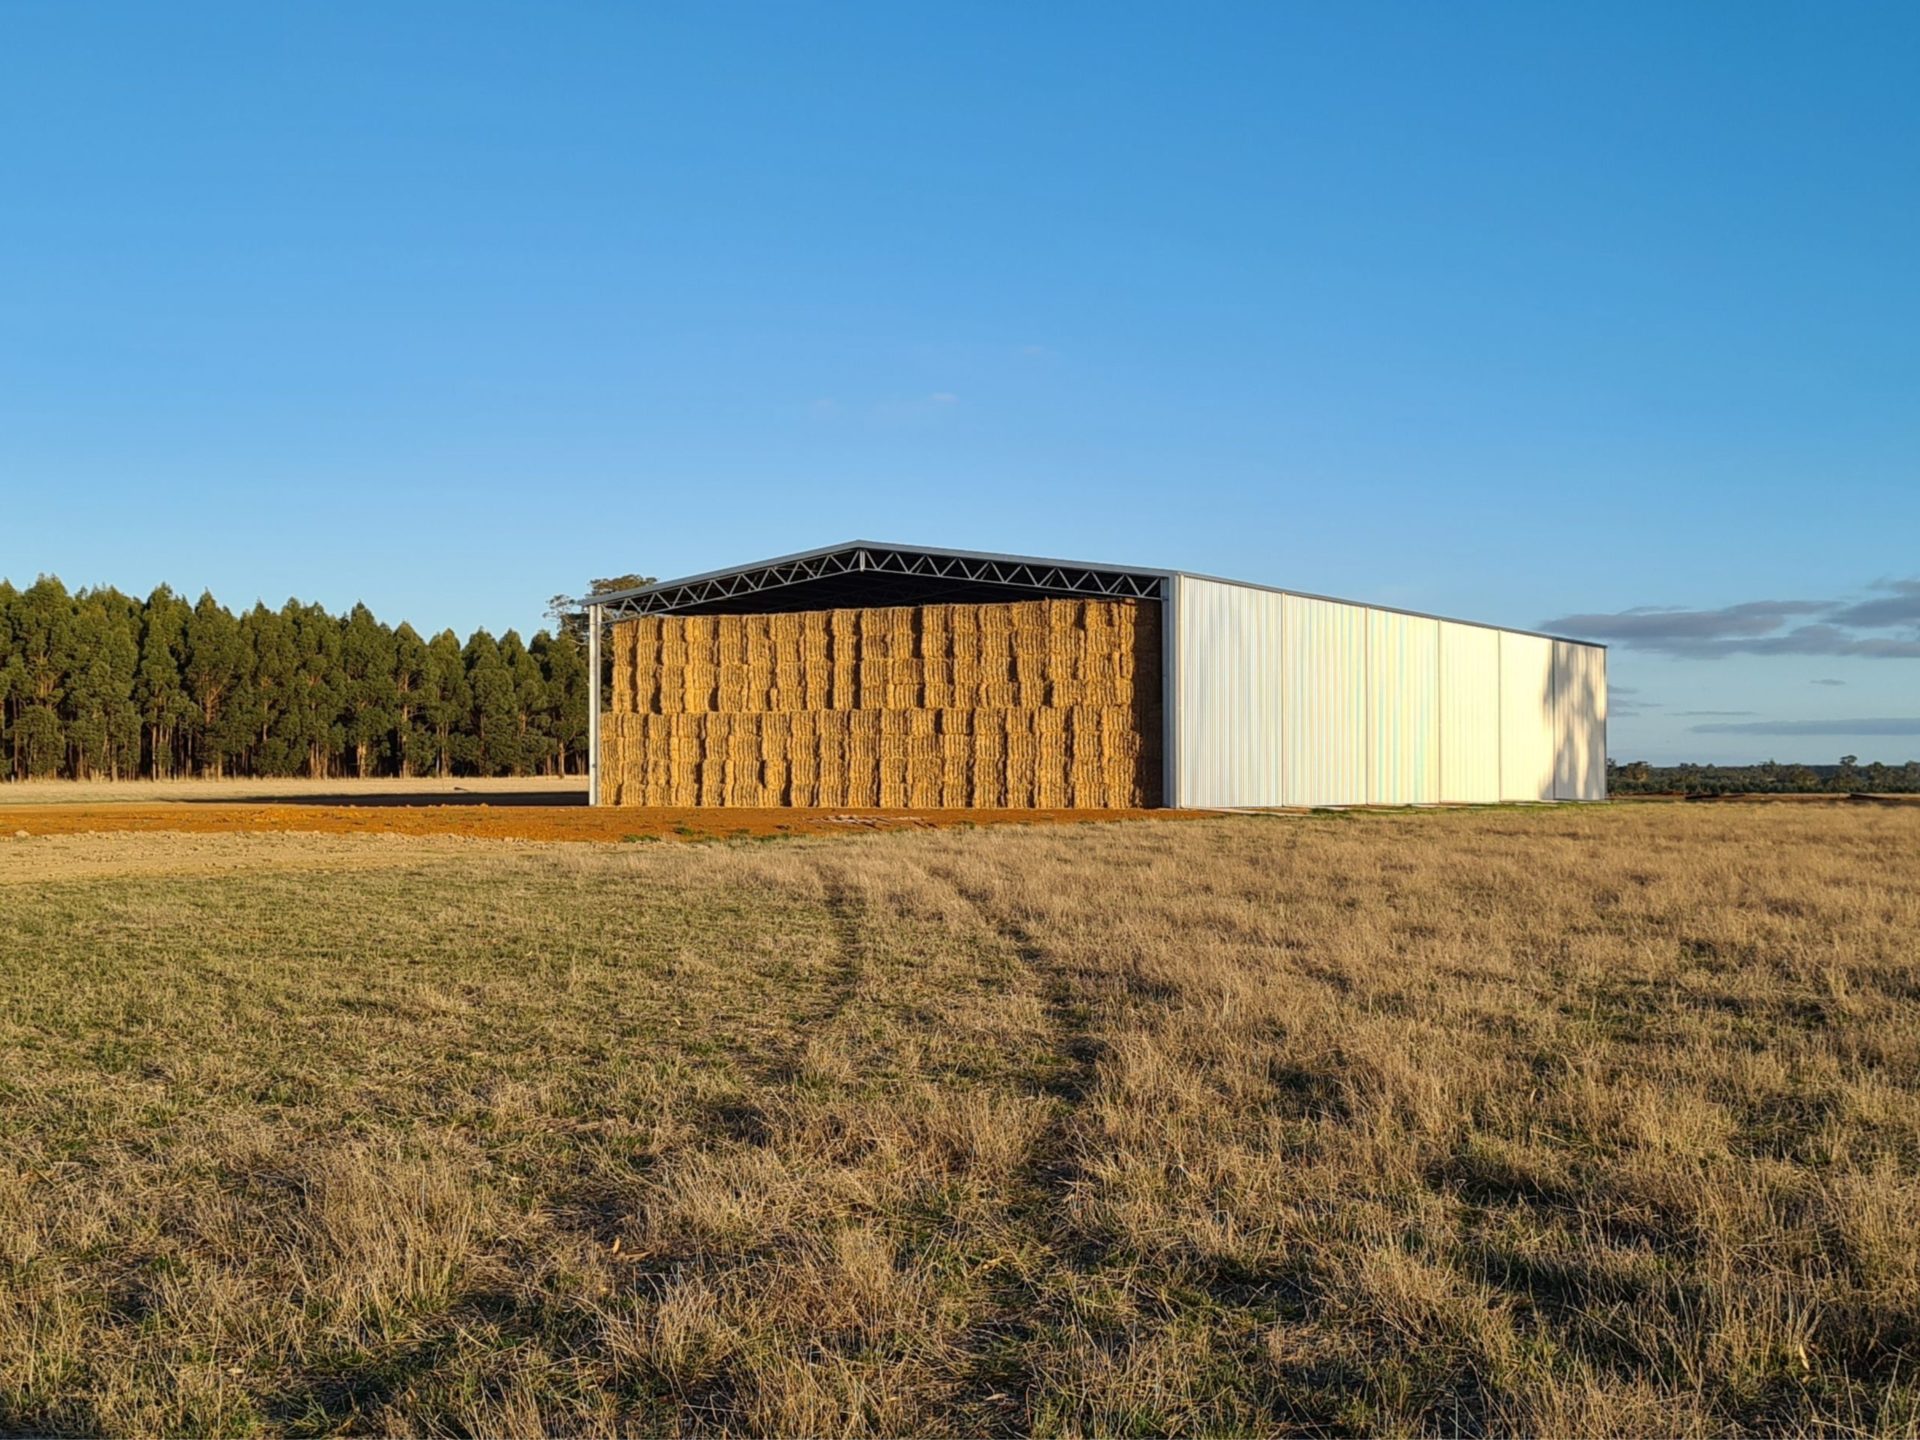 You are currently viewing 48m x 24m x 7.5m two-sided hay shed